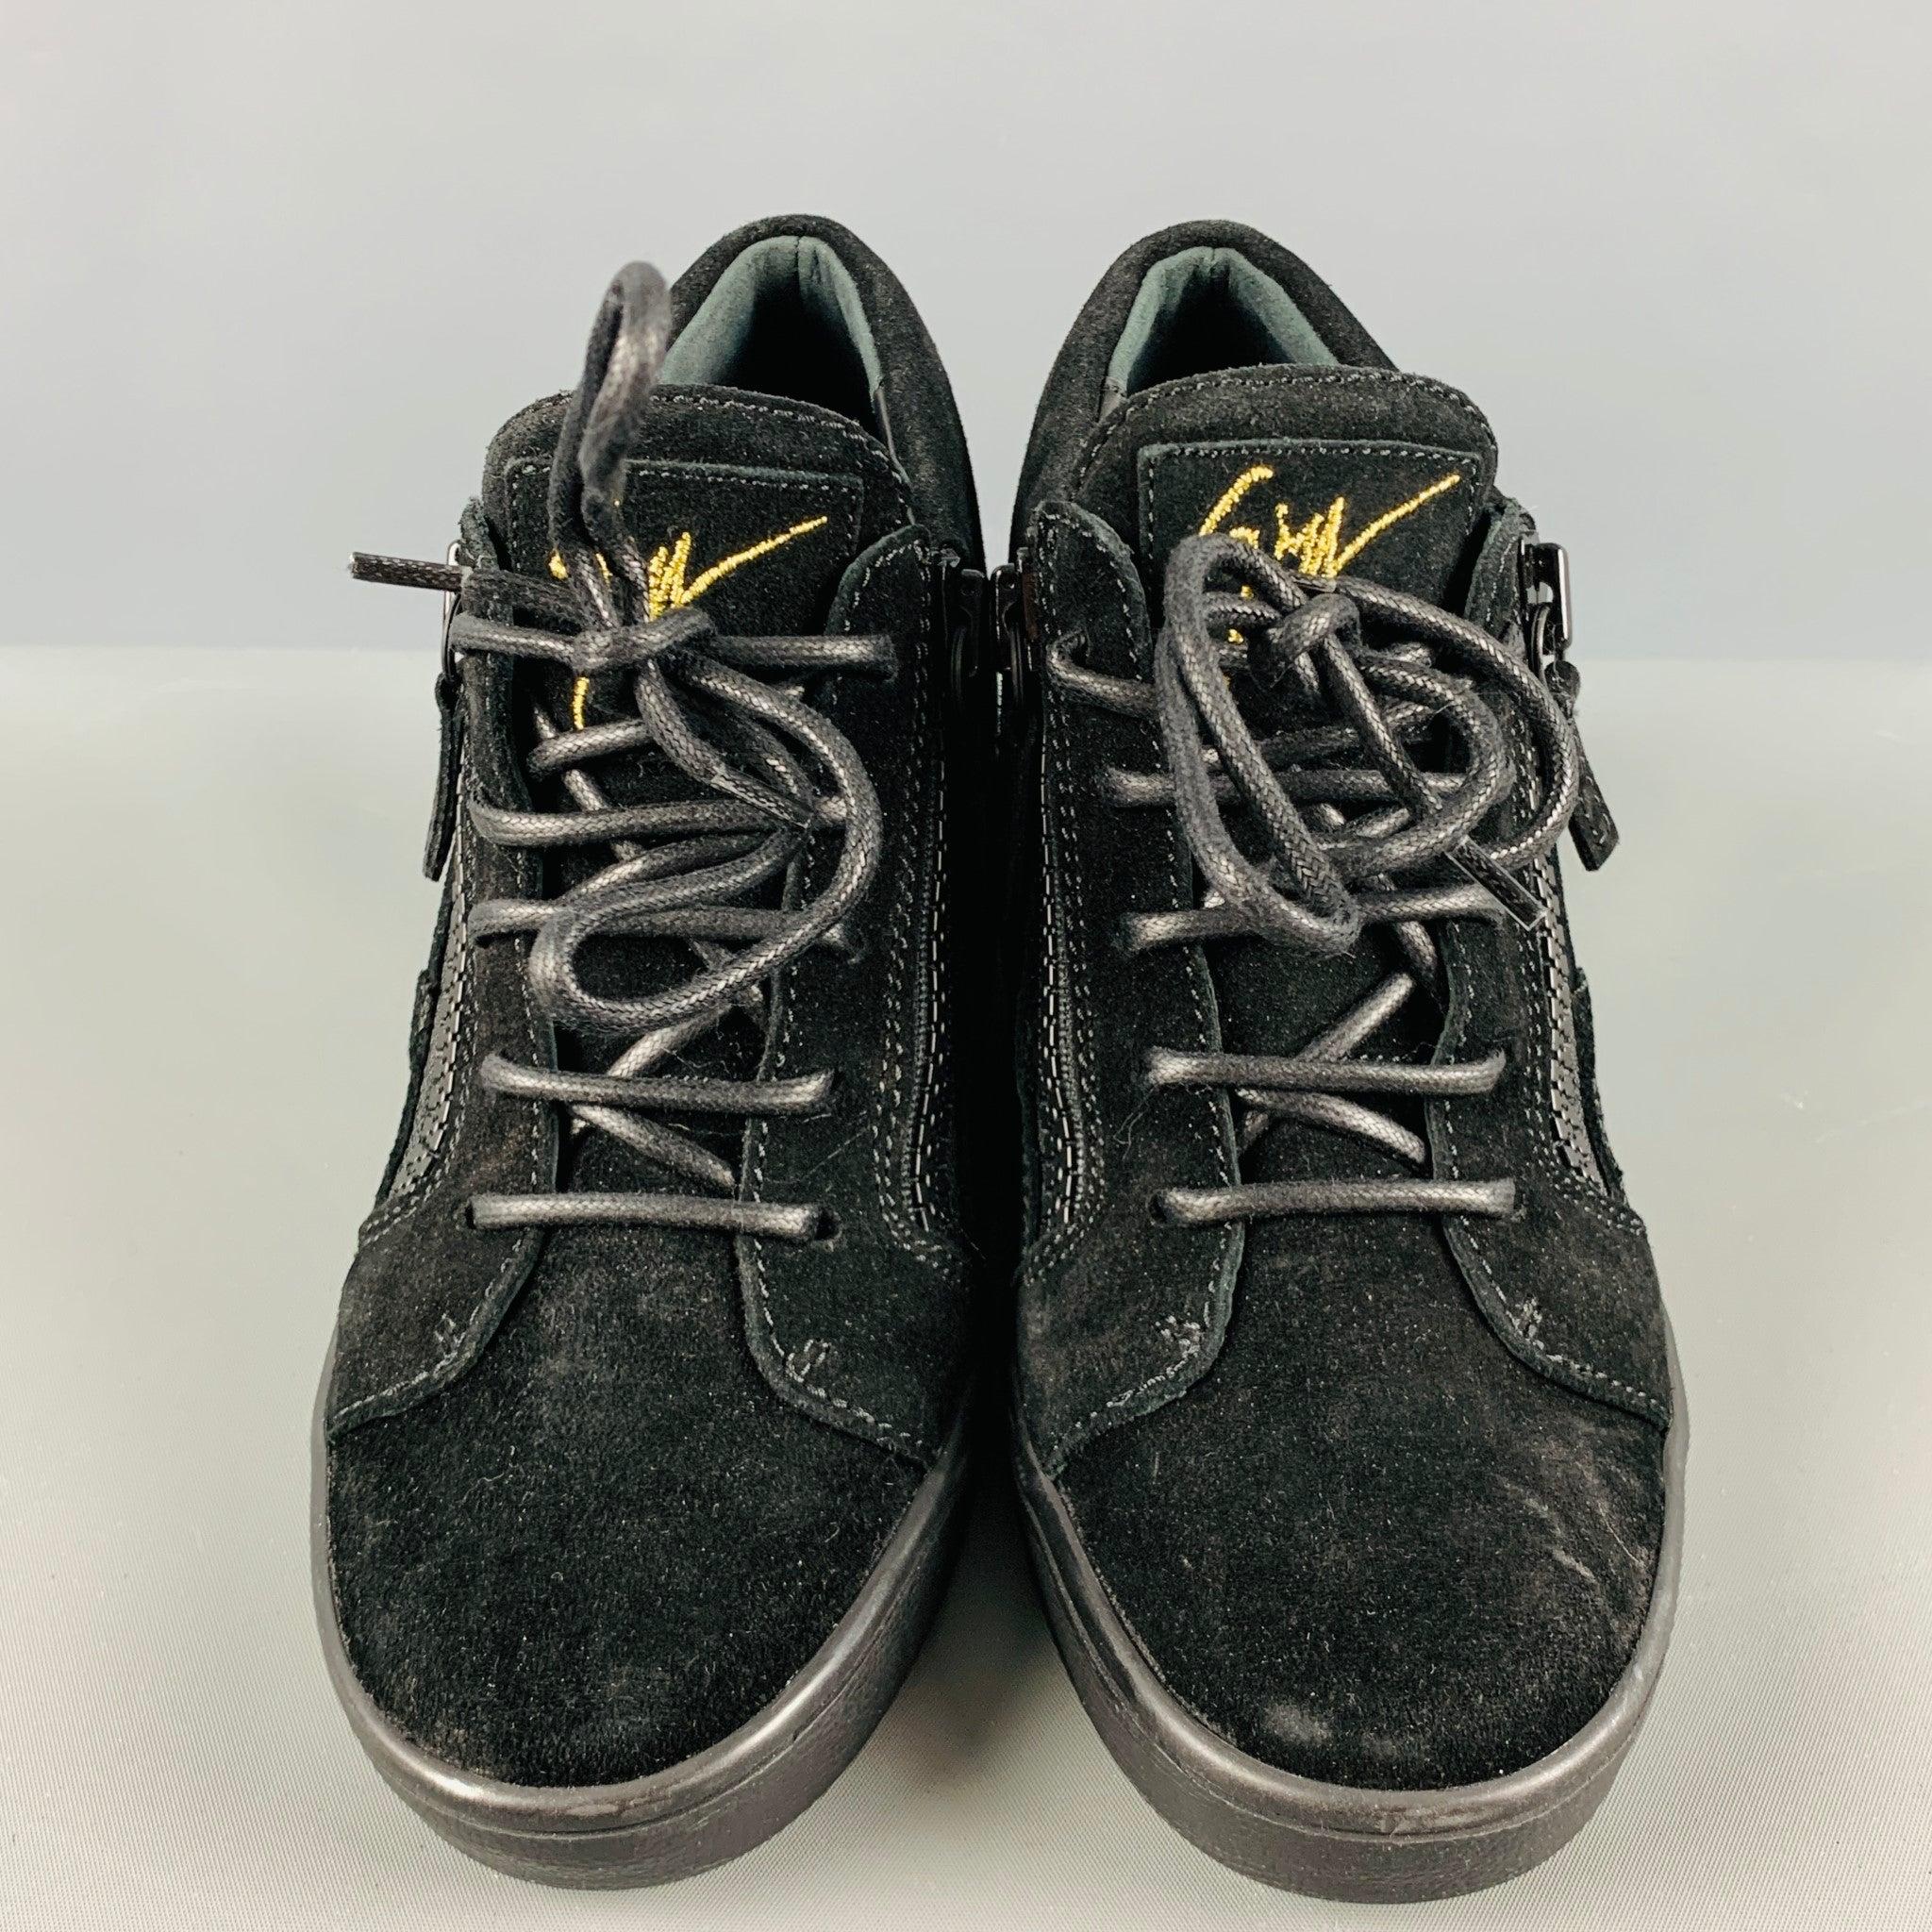 Men's GIUSEPPE ZANOTTI Size 5 Black Suede High Top Sneakers For Sale